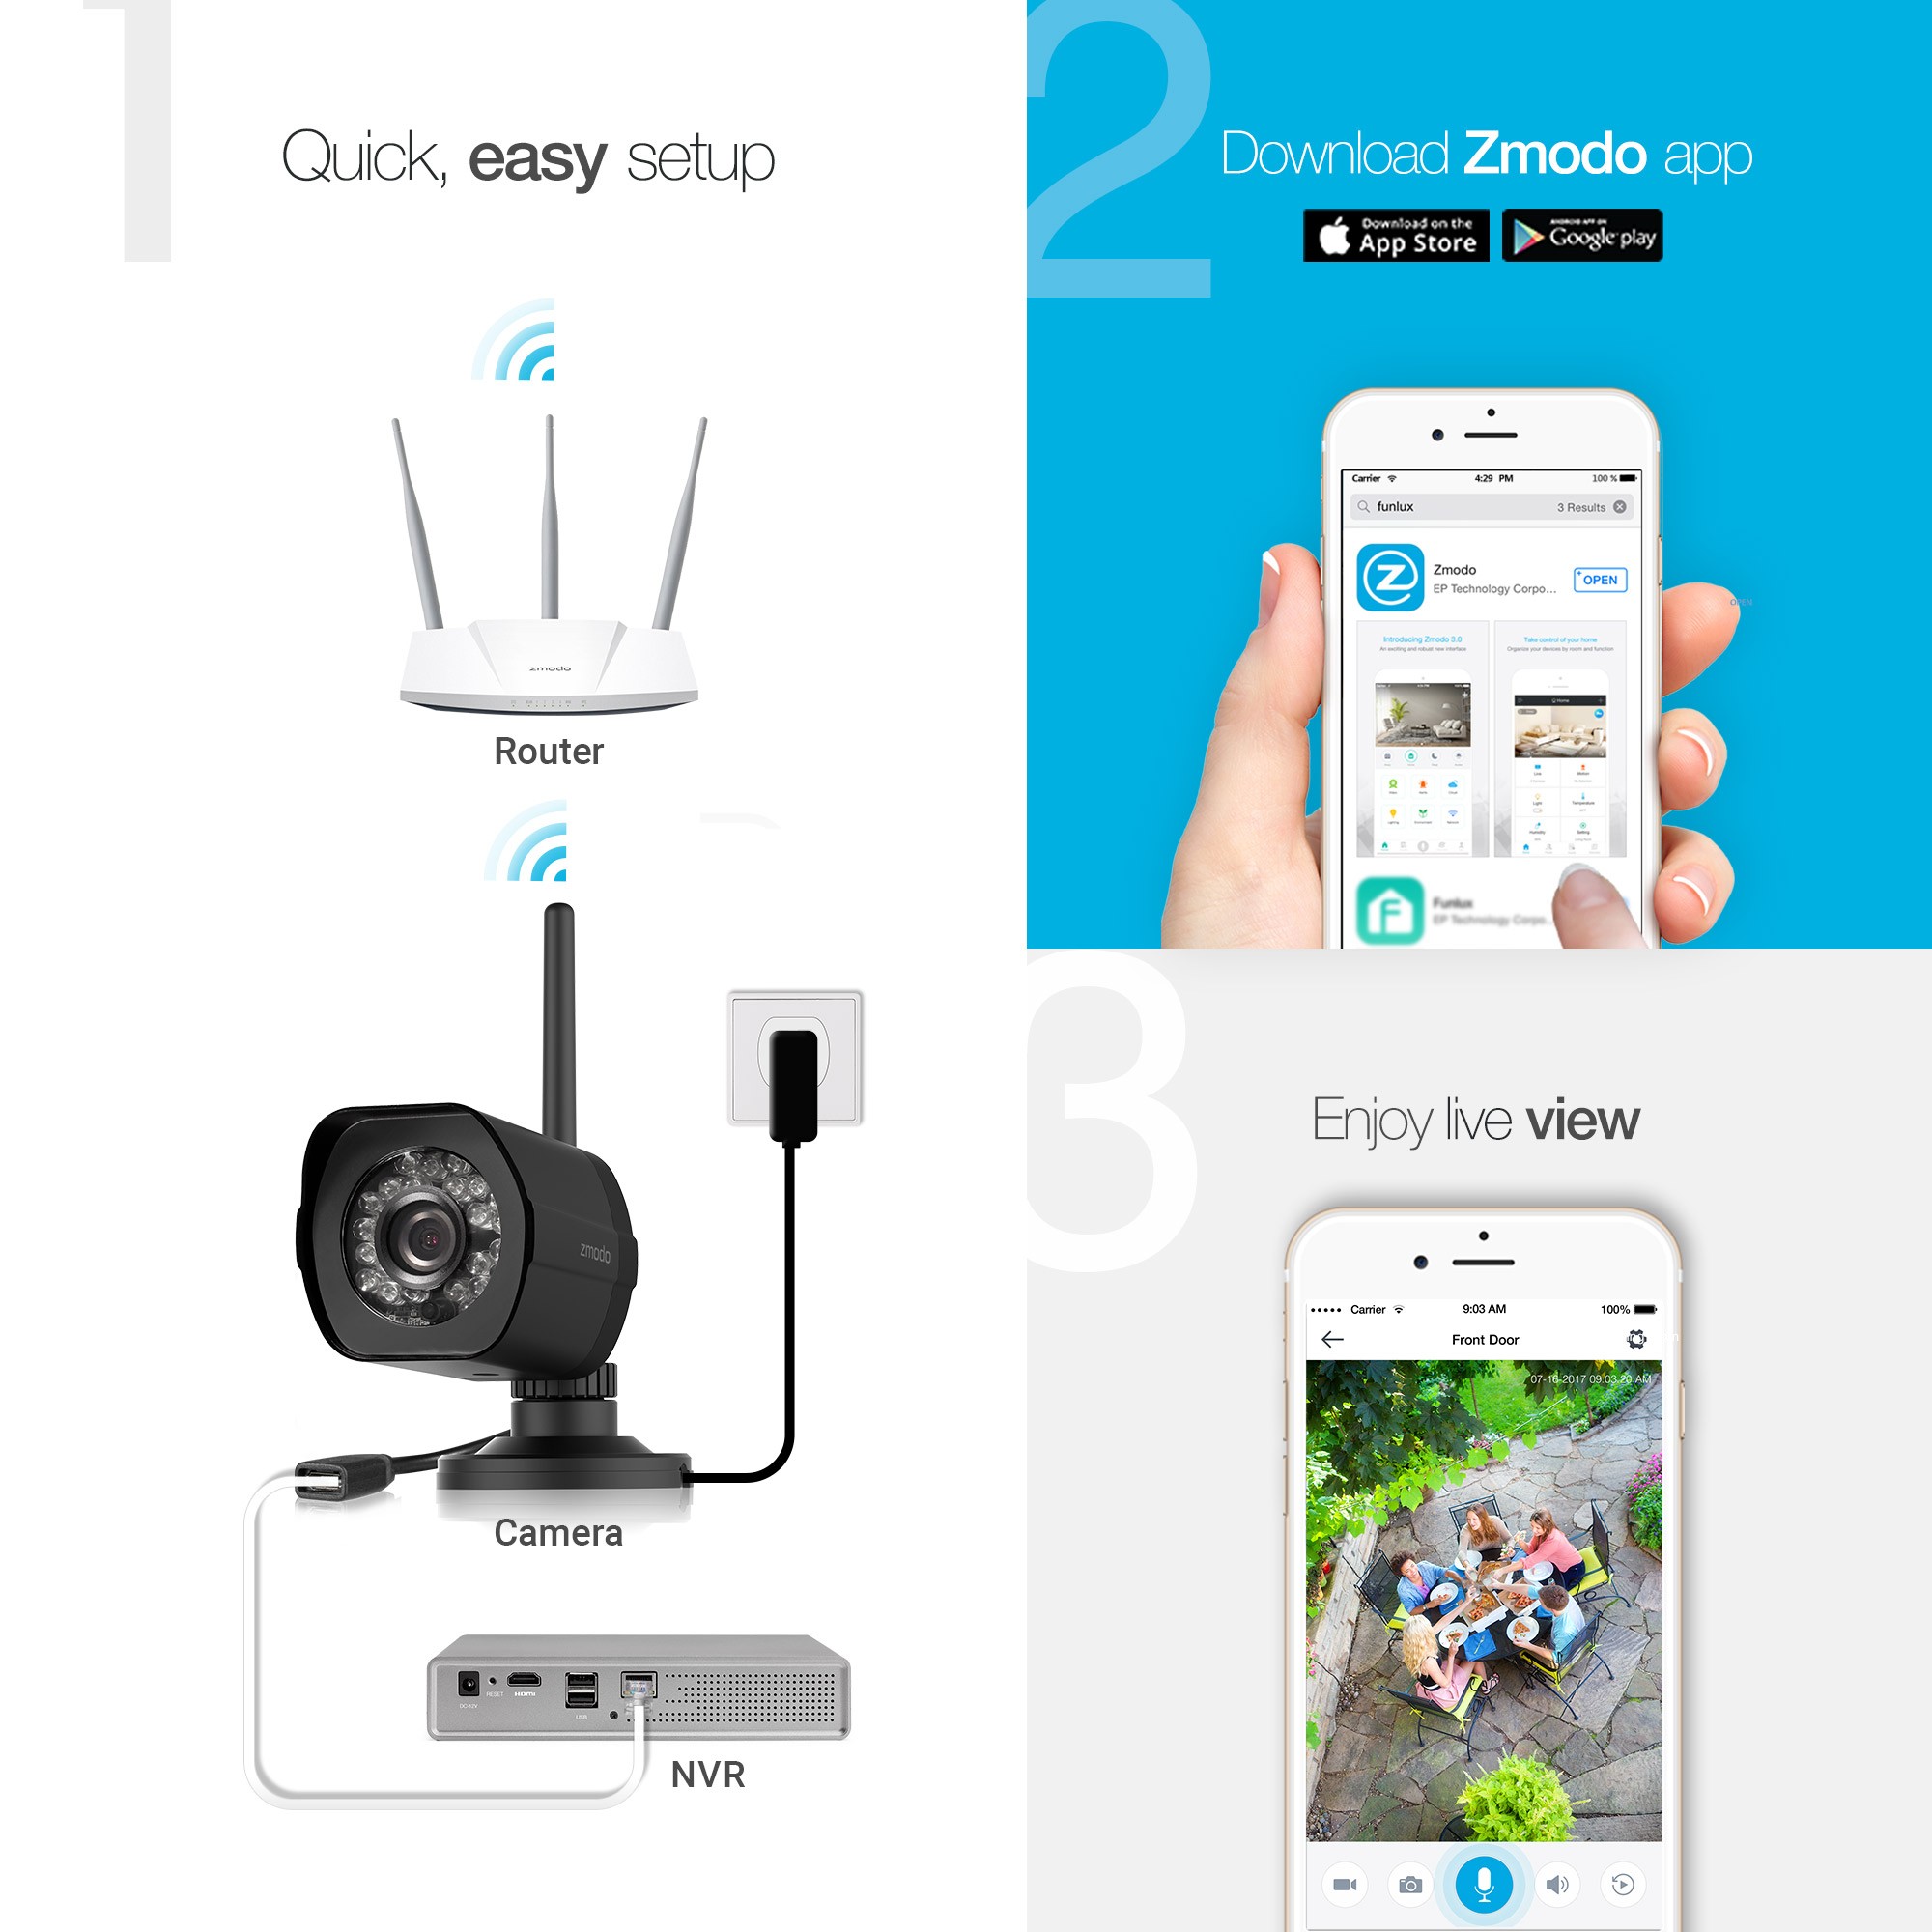 Zmodo - Global Provider of Smart Devices